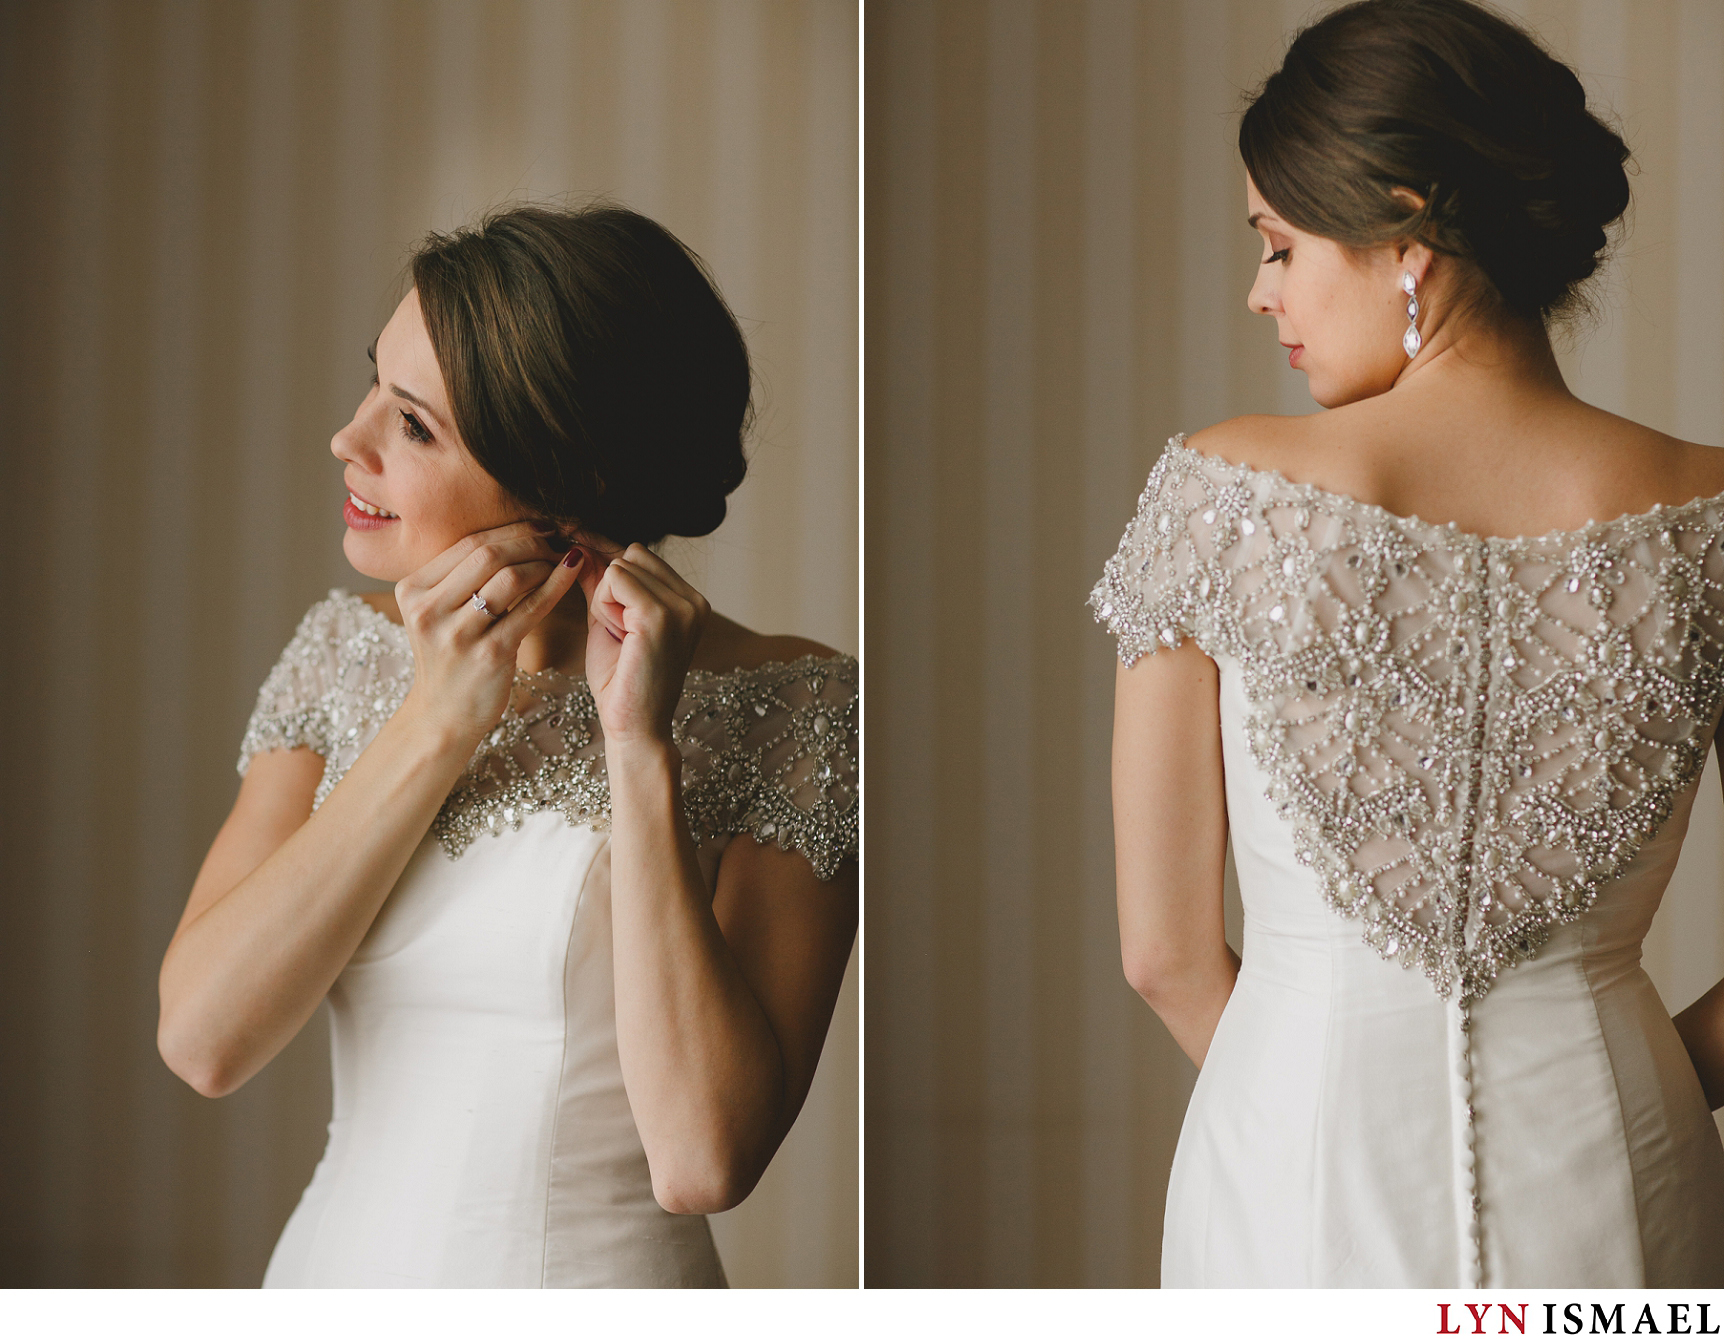 Beautiful, elegant bride shows off the back of her itricately beaded wedding gown.